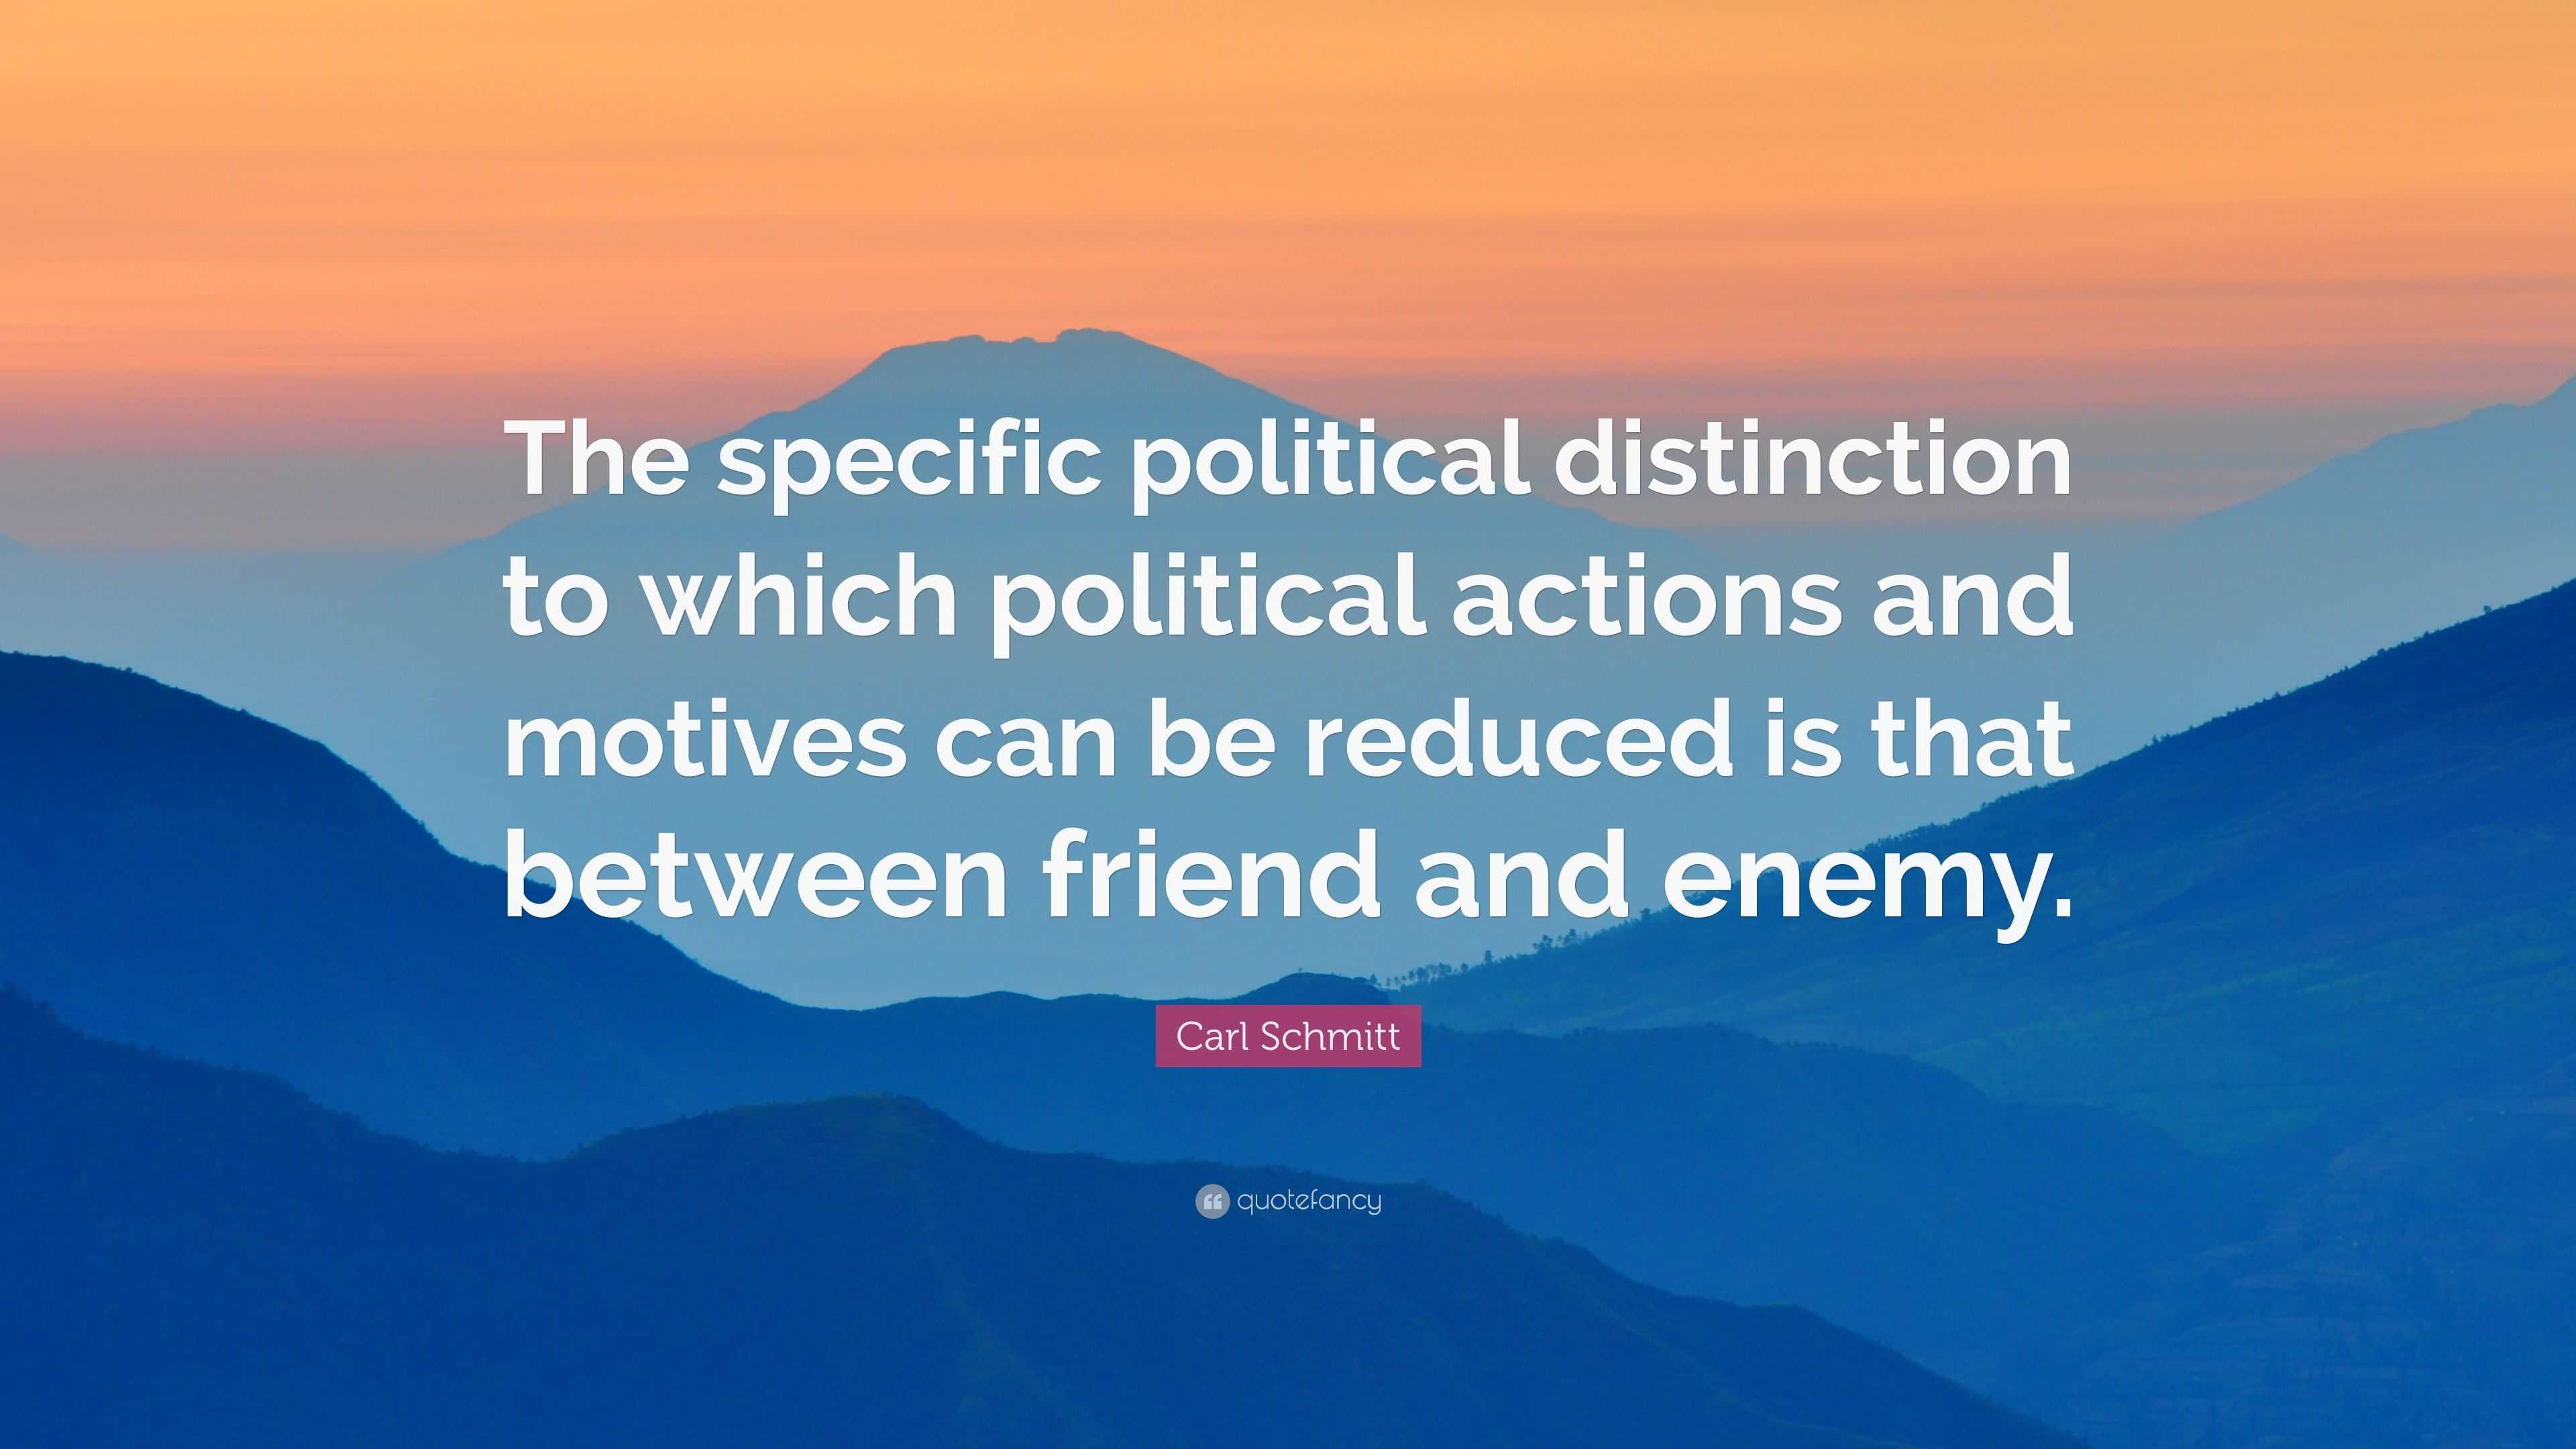 Carl Schmitt Quote: “The specific political distinction to which